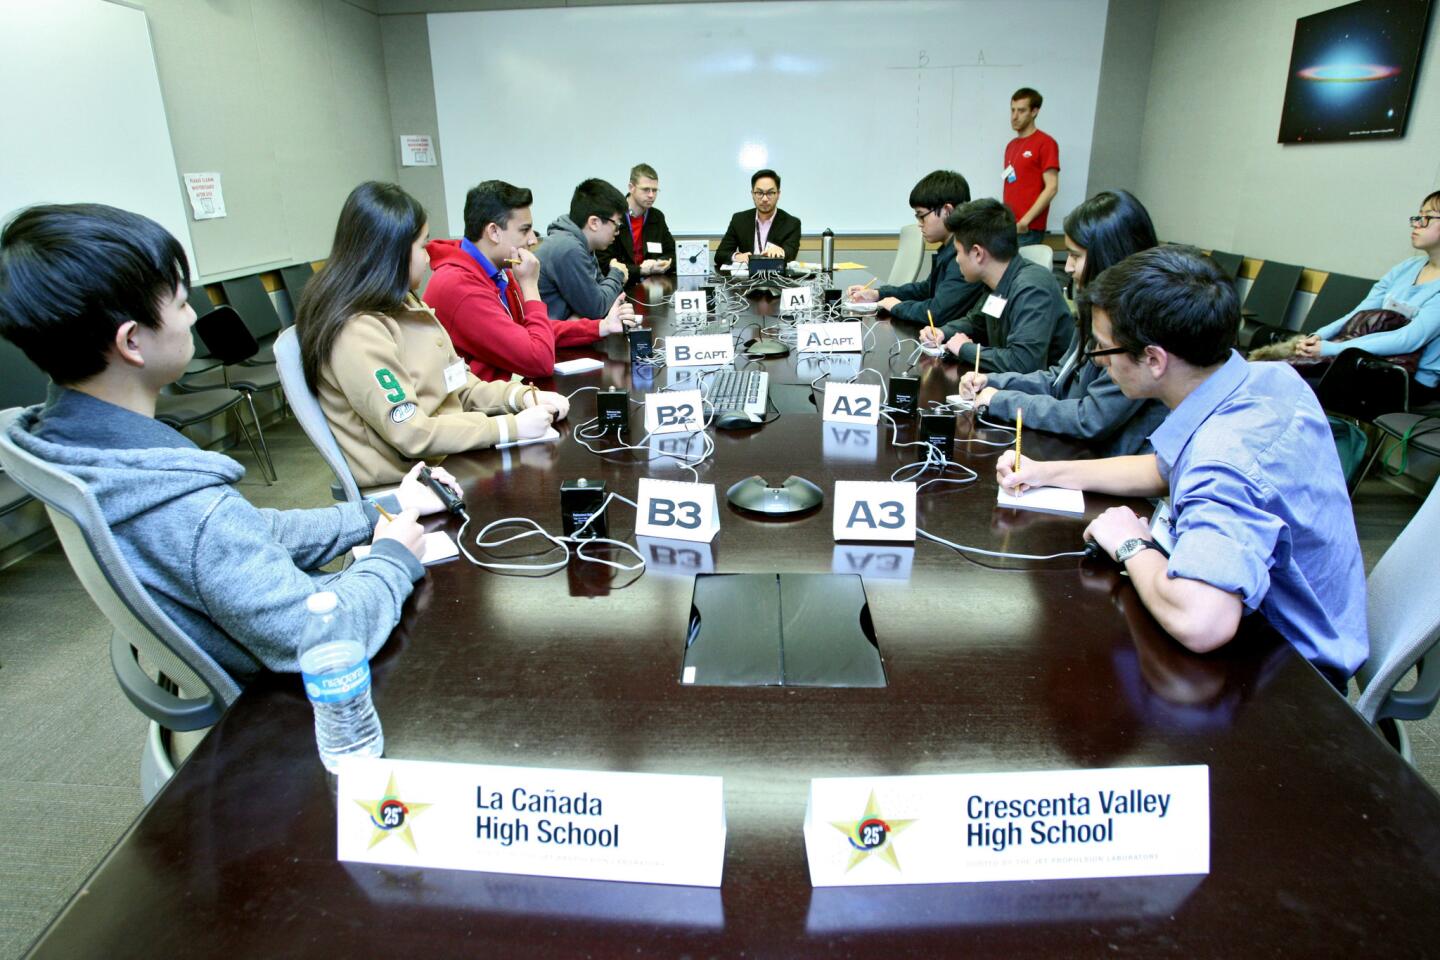 The La Cañada High School team, left, competed vs. the Crescenta Valley High School team in the first round of the 25th annual JPL Regional Competition of the 2017 National Science Bowl, at the Jet Propulsion Laboratory in La Cañada Flintridge on Saturday, Jan. 28, 2017. Other local teams competing included Hoover High School and Clark Magnet.